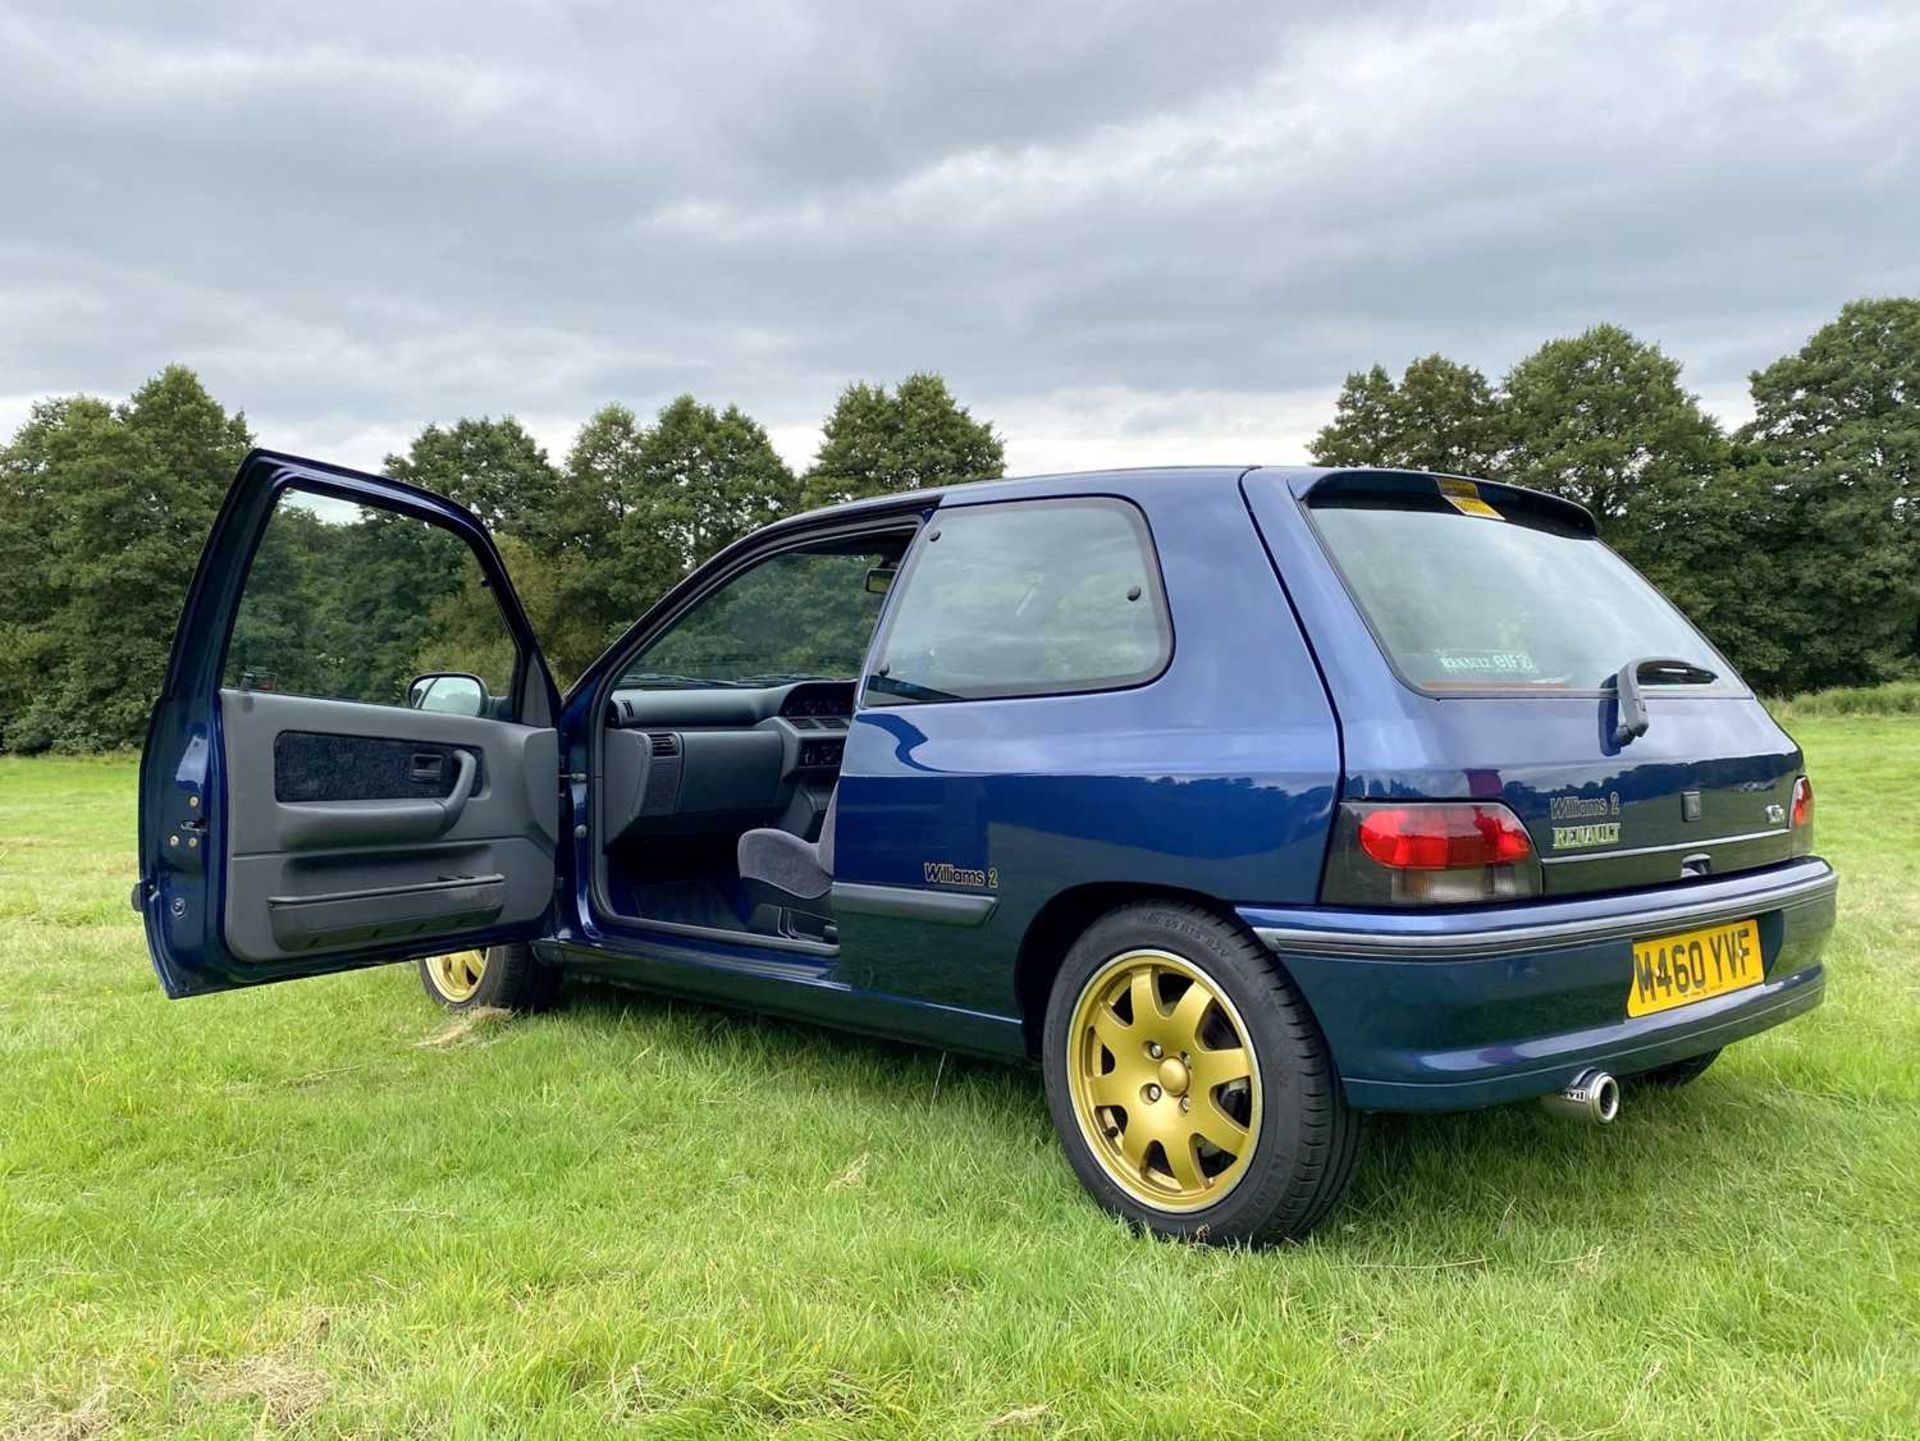 1995 Renault Clio Williams 2 UK-delivered, second series model and said to be one of just 482 produc - Image 18 of 66